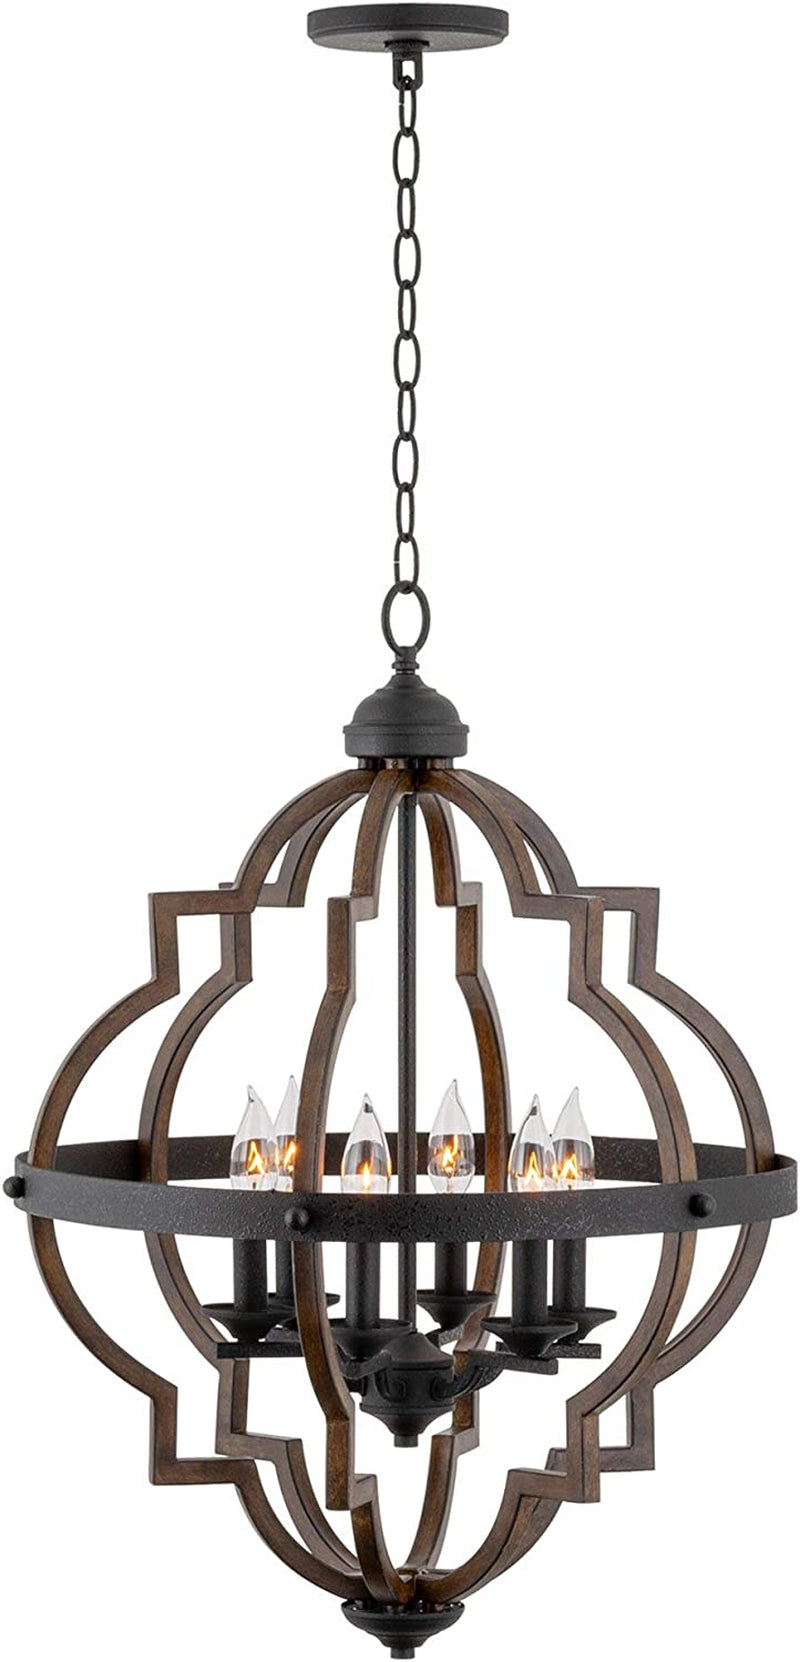 Kira Home Capistrano 28" 6-Light Rustic Farmhouse Chandelier, Wood Style Metal Frame, Textured Black Accents + Walnut Style Finish Home & Garden > Lighting > Lighting Fixtures > Chandeliers Kira Home   